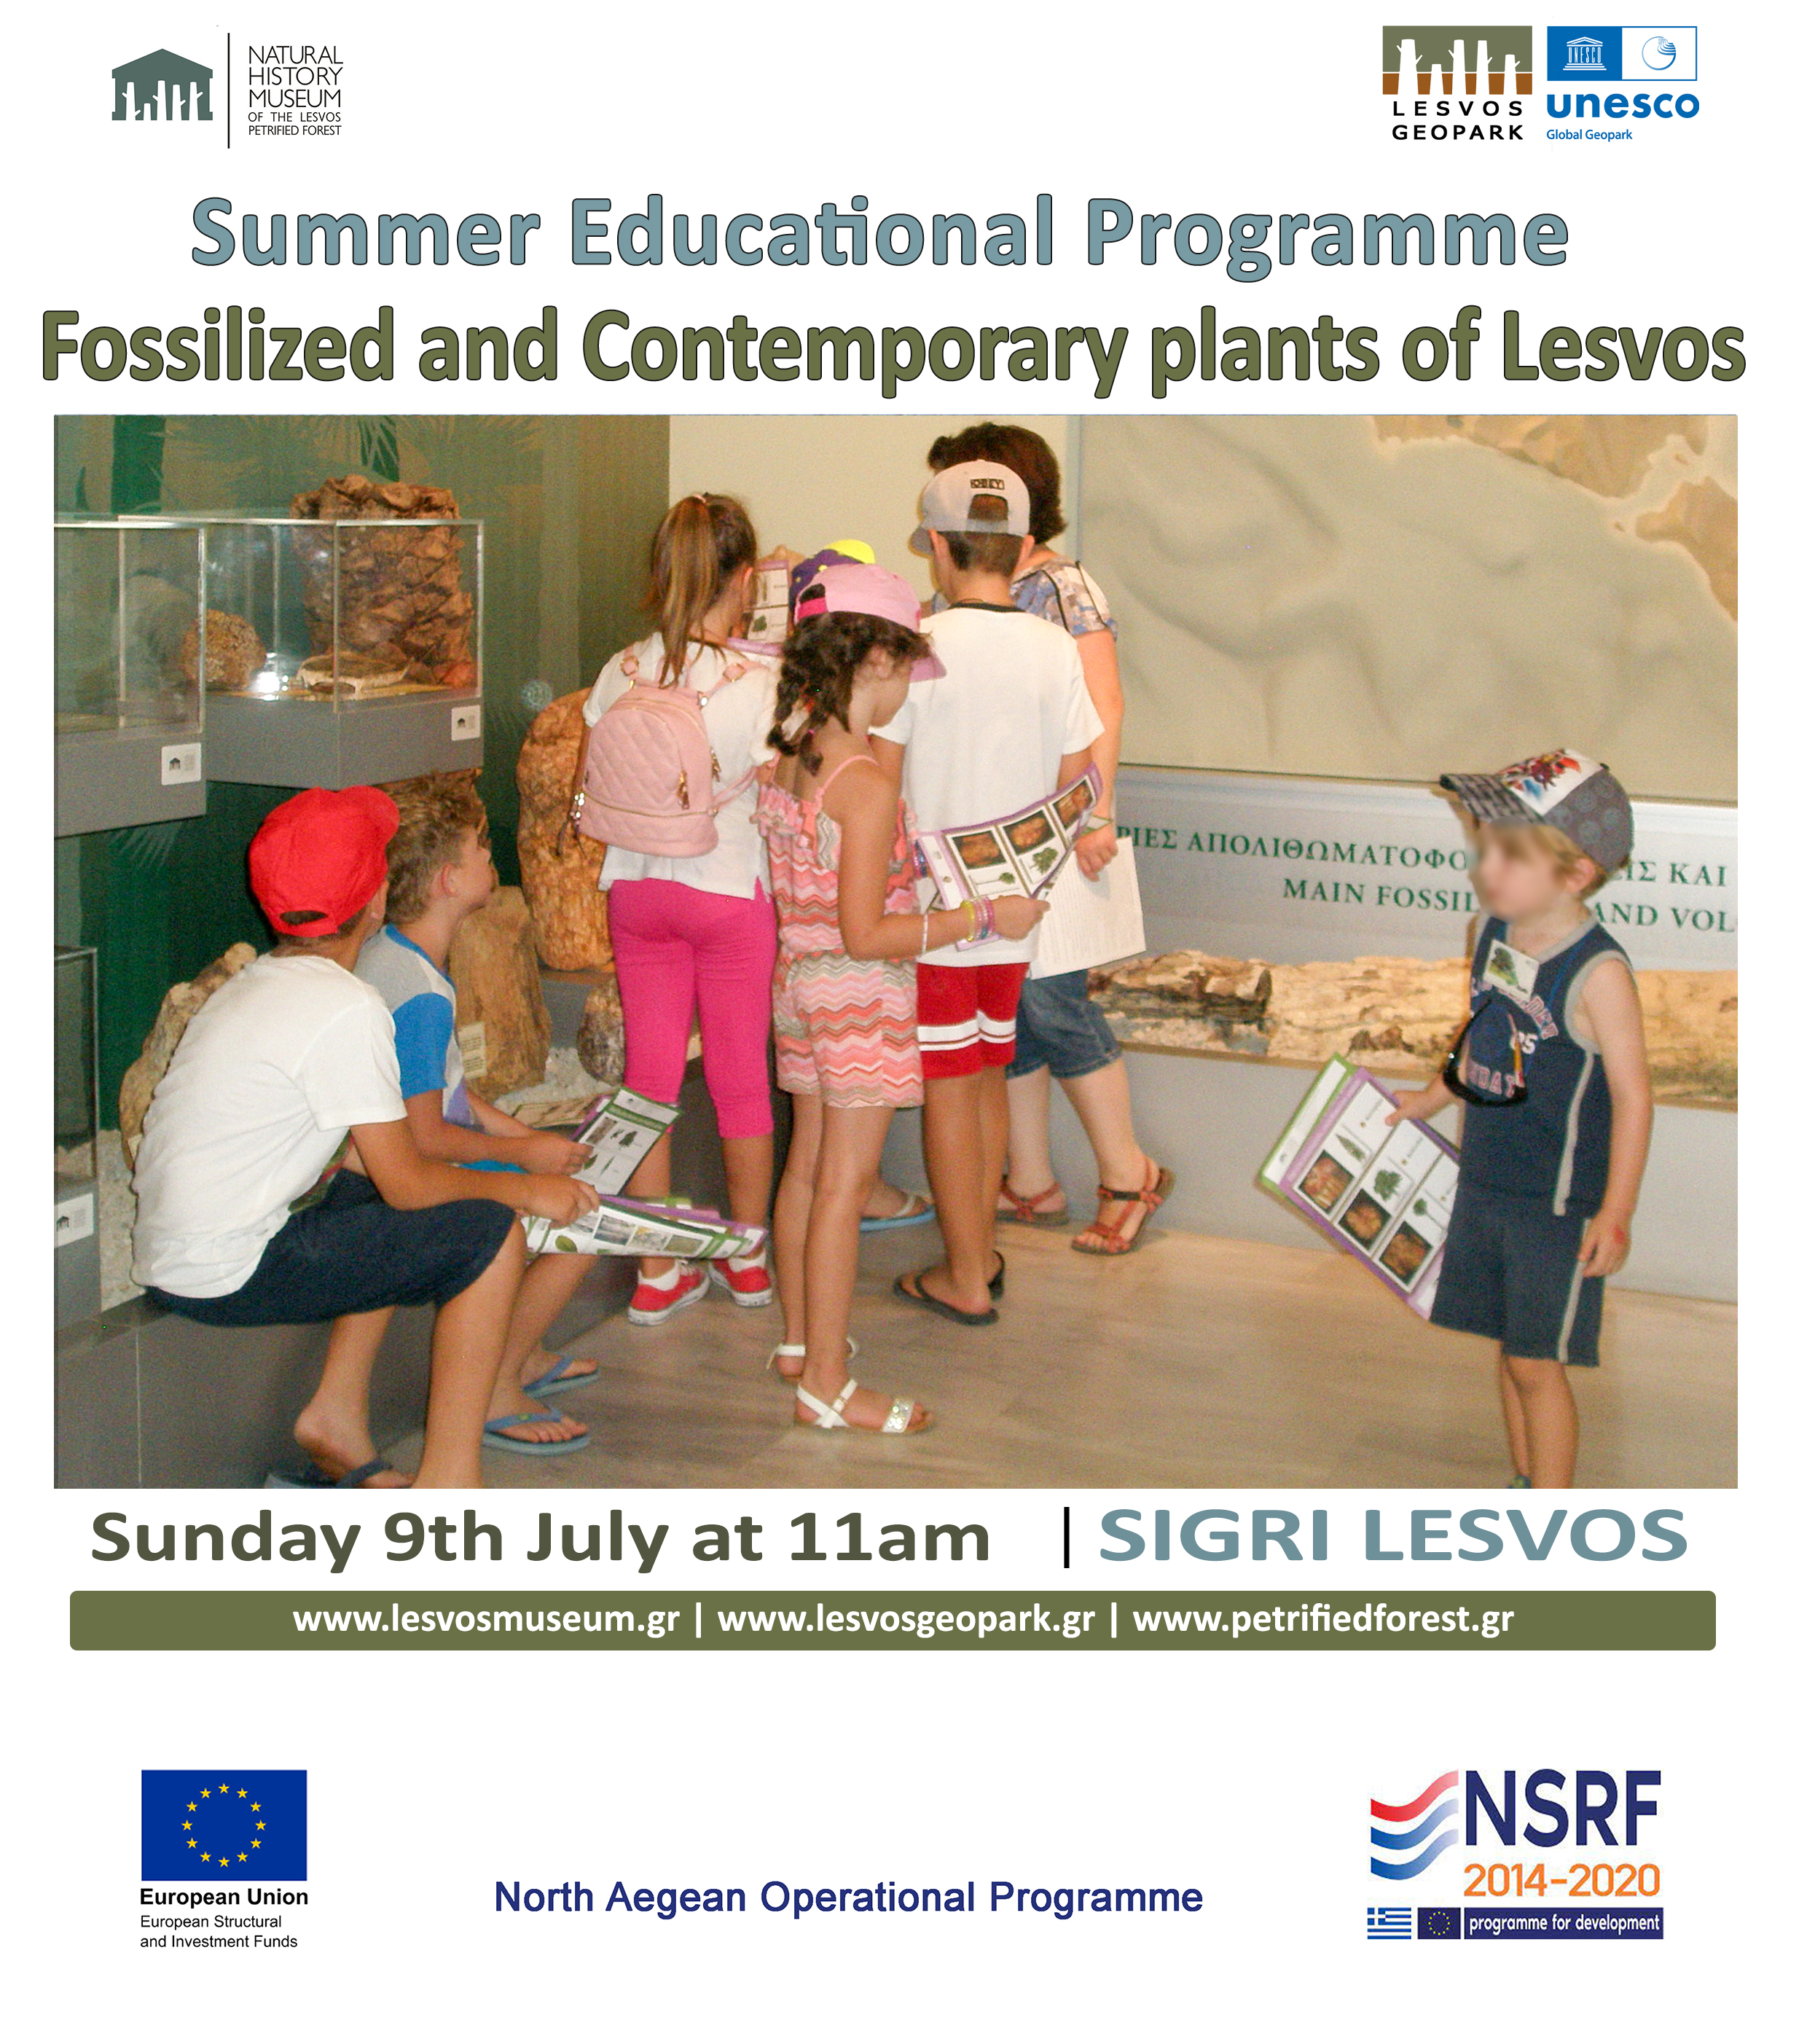 Summer Educational Program “Fossilized and Contemporary plants of Lesvos”